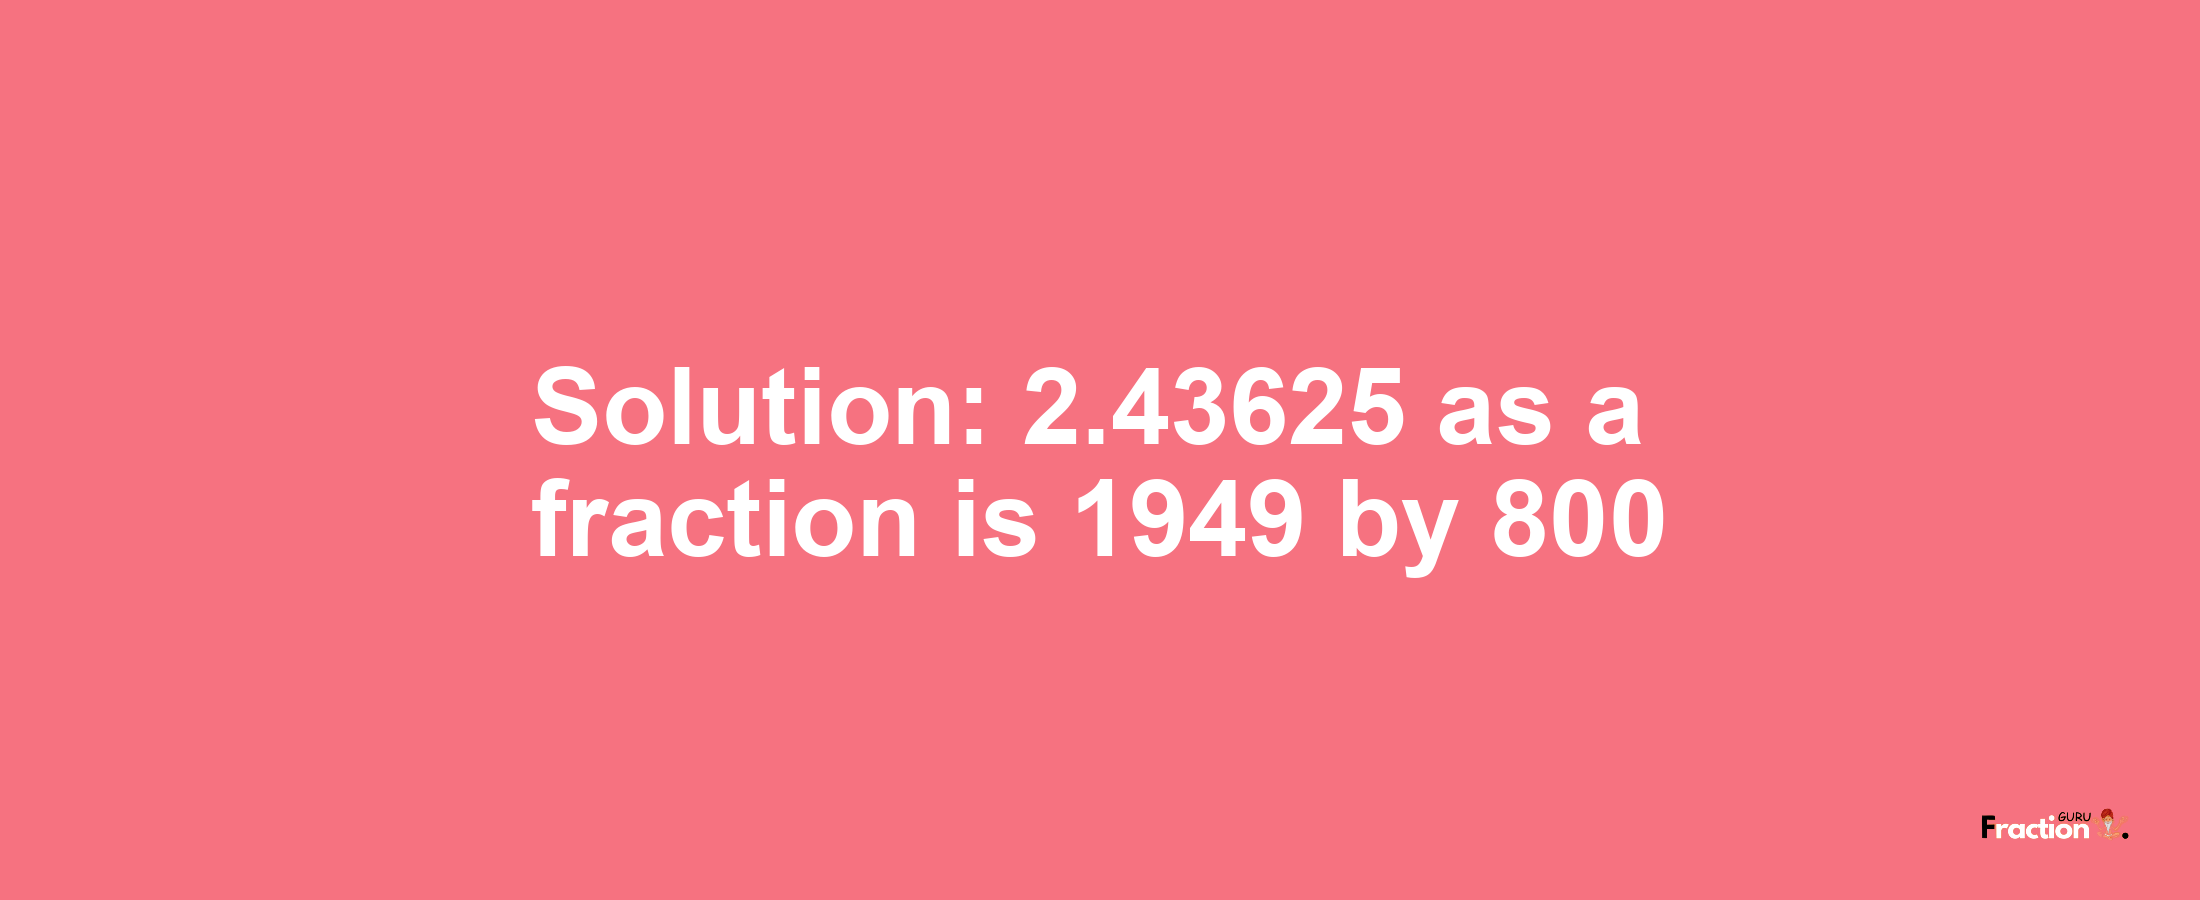 Solution:2.43625 as a fraction is 1949/800